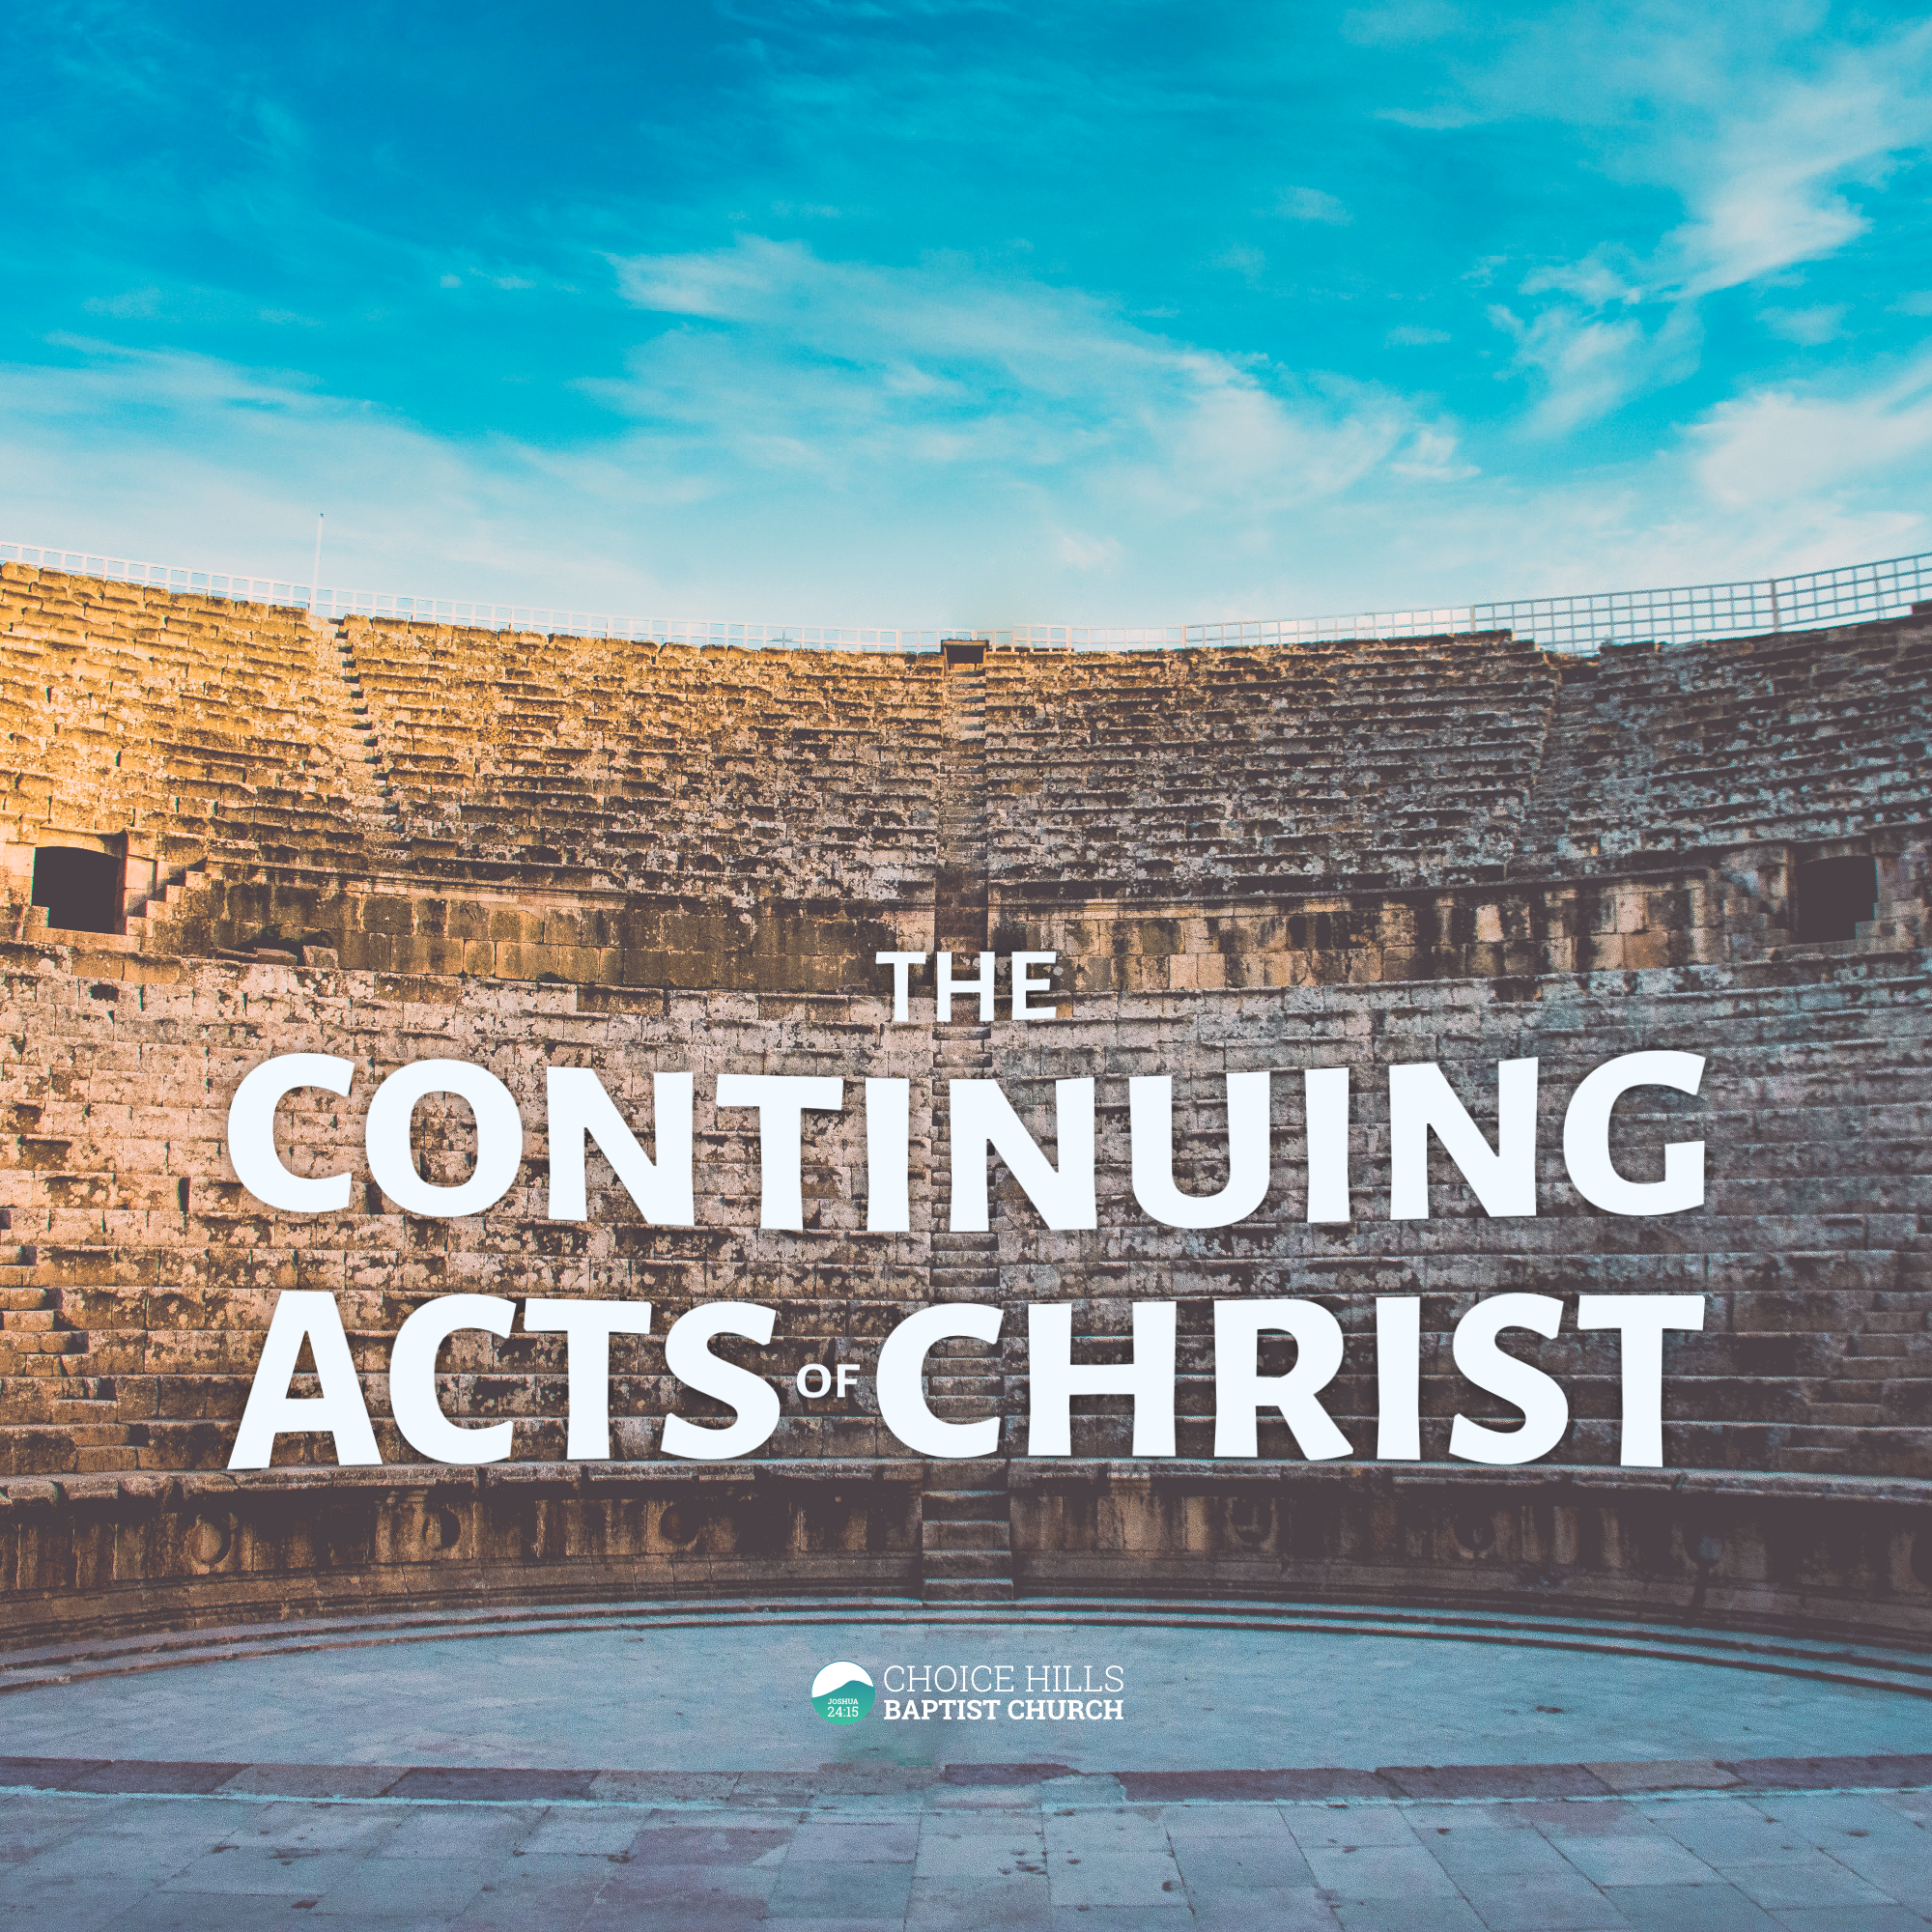 The Importance of the Ascension of Christ (Part 1): The Continuing Acts of Christ—A Study of the Book of Acts